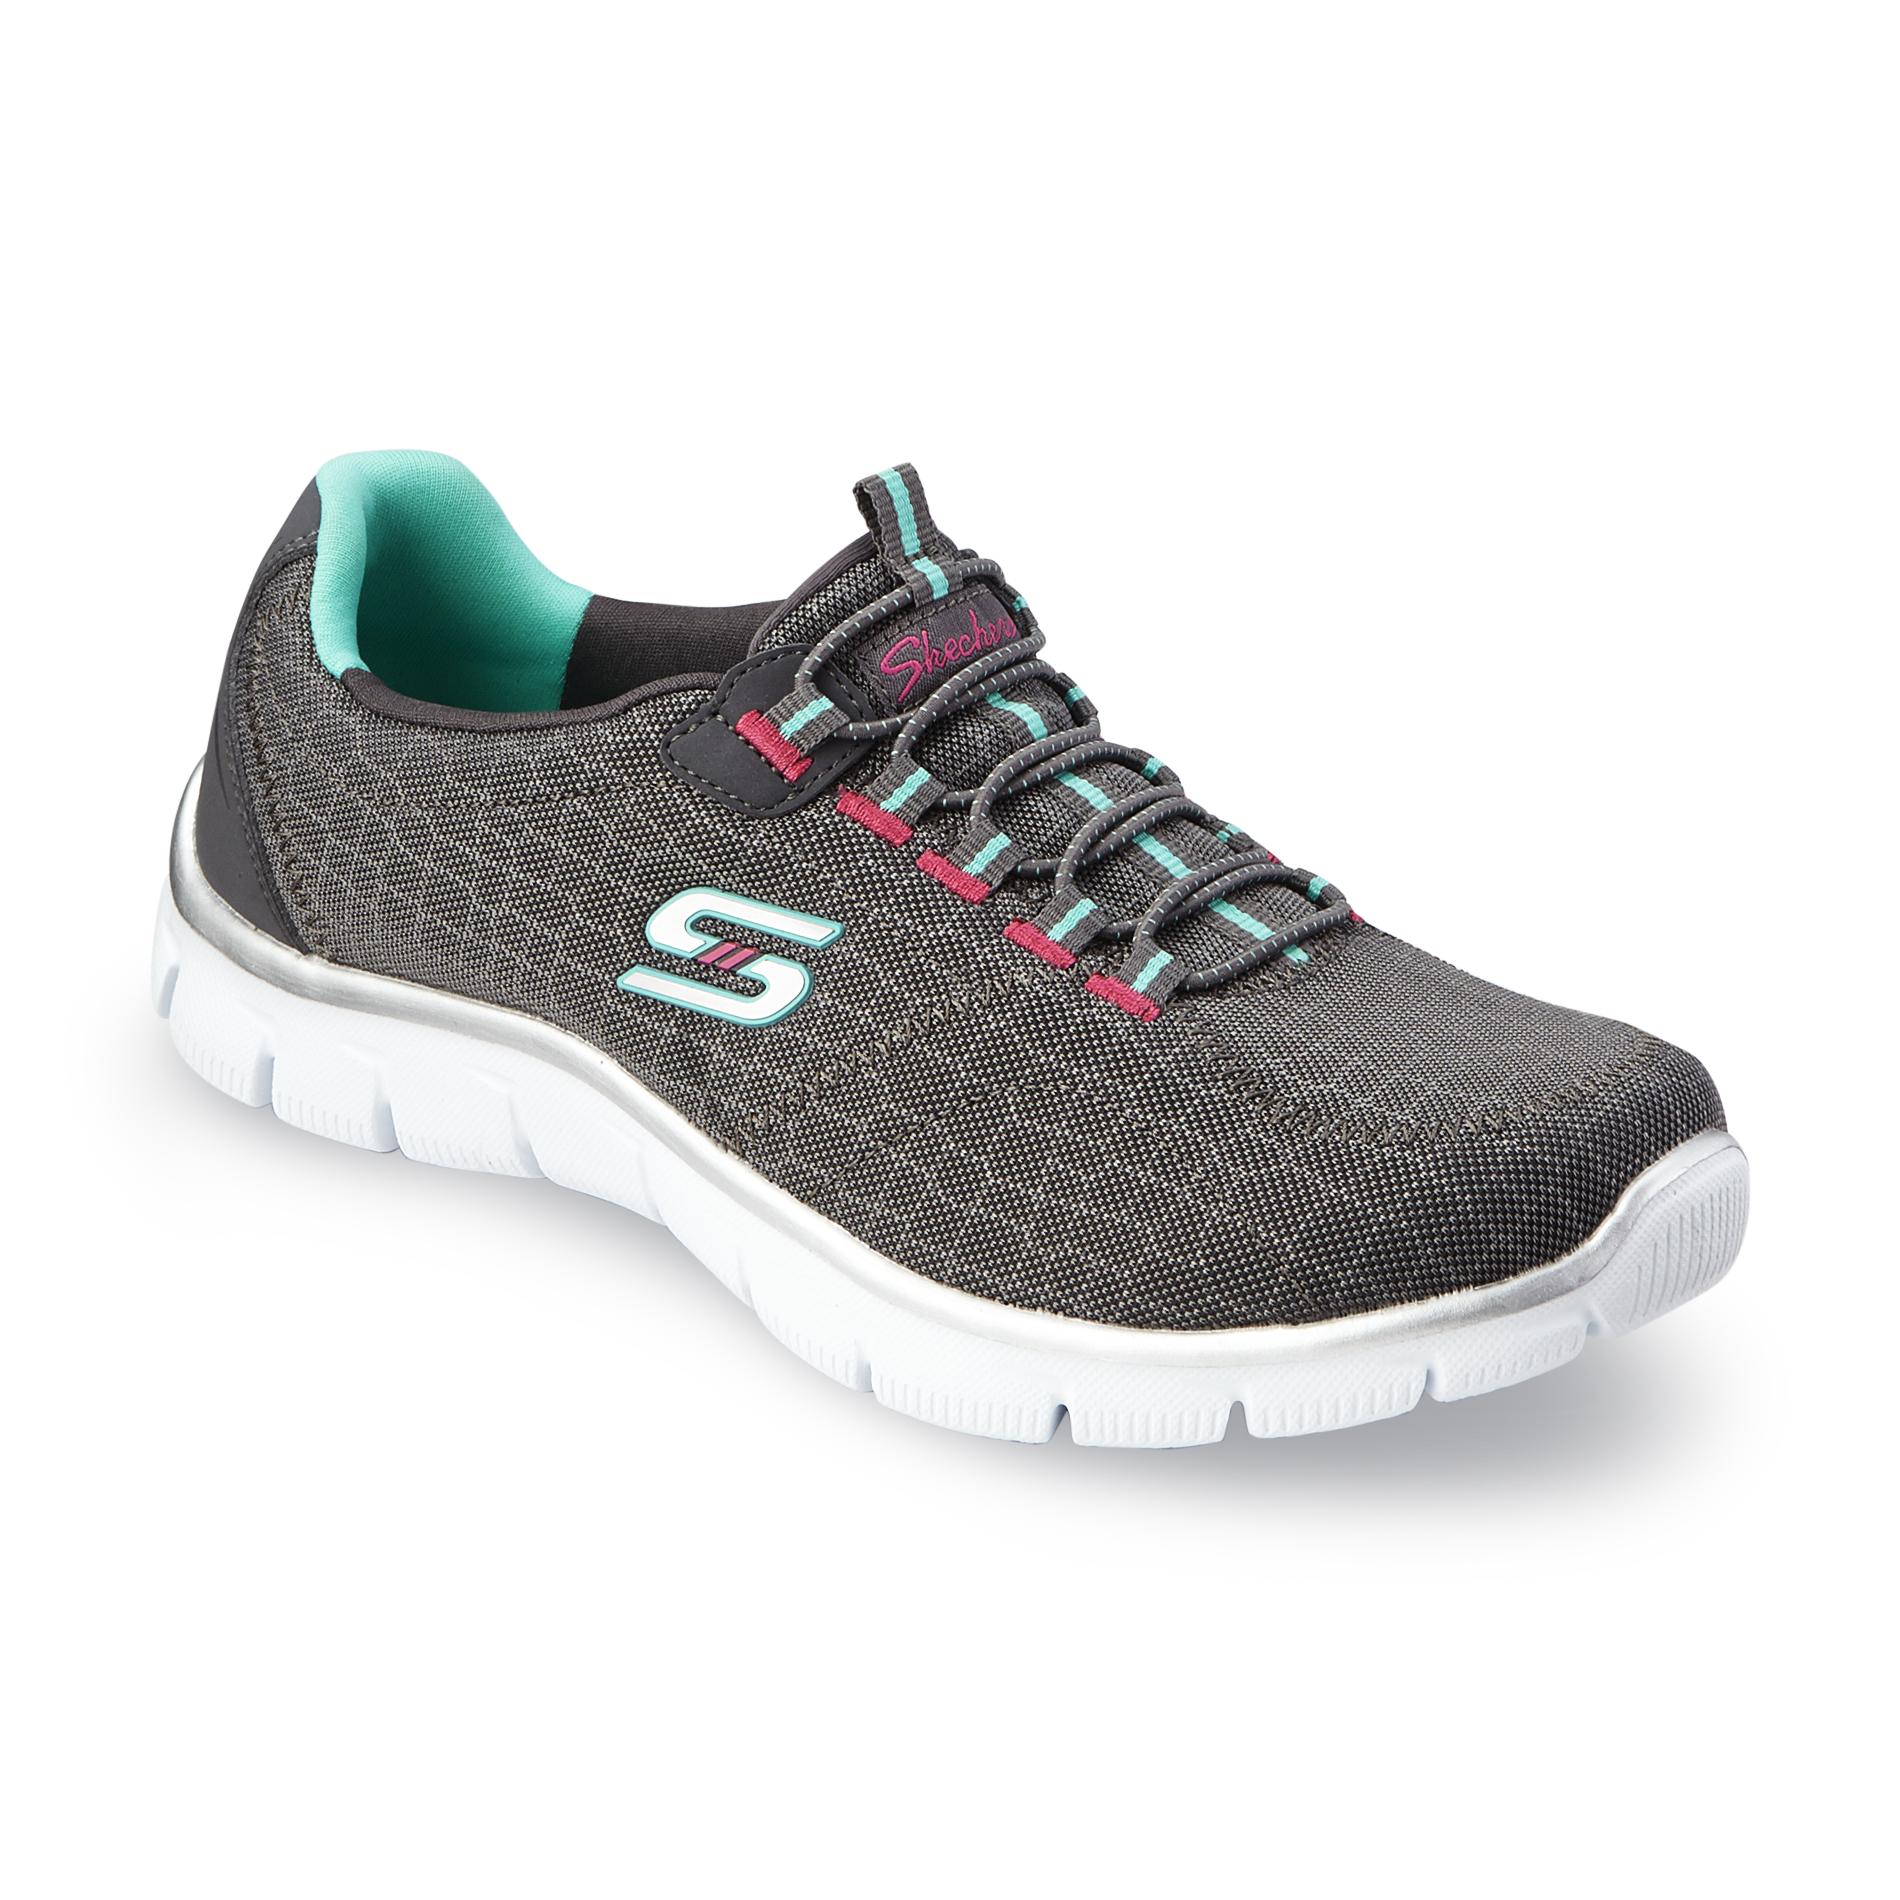 Skechers Women's Relaxed Fit Empire Gray/Green Casual Shoe